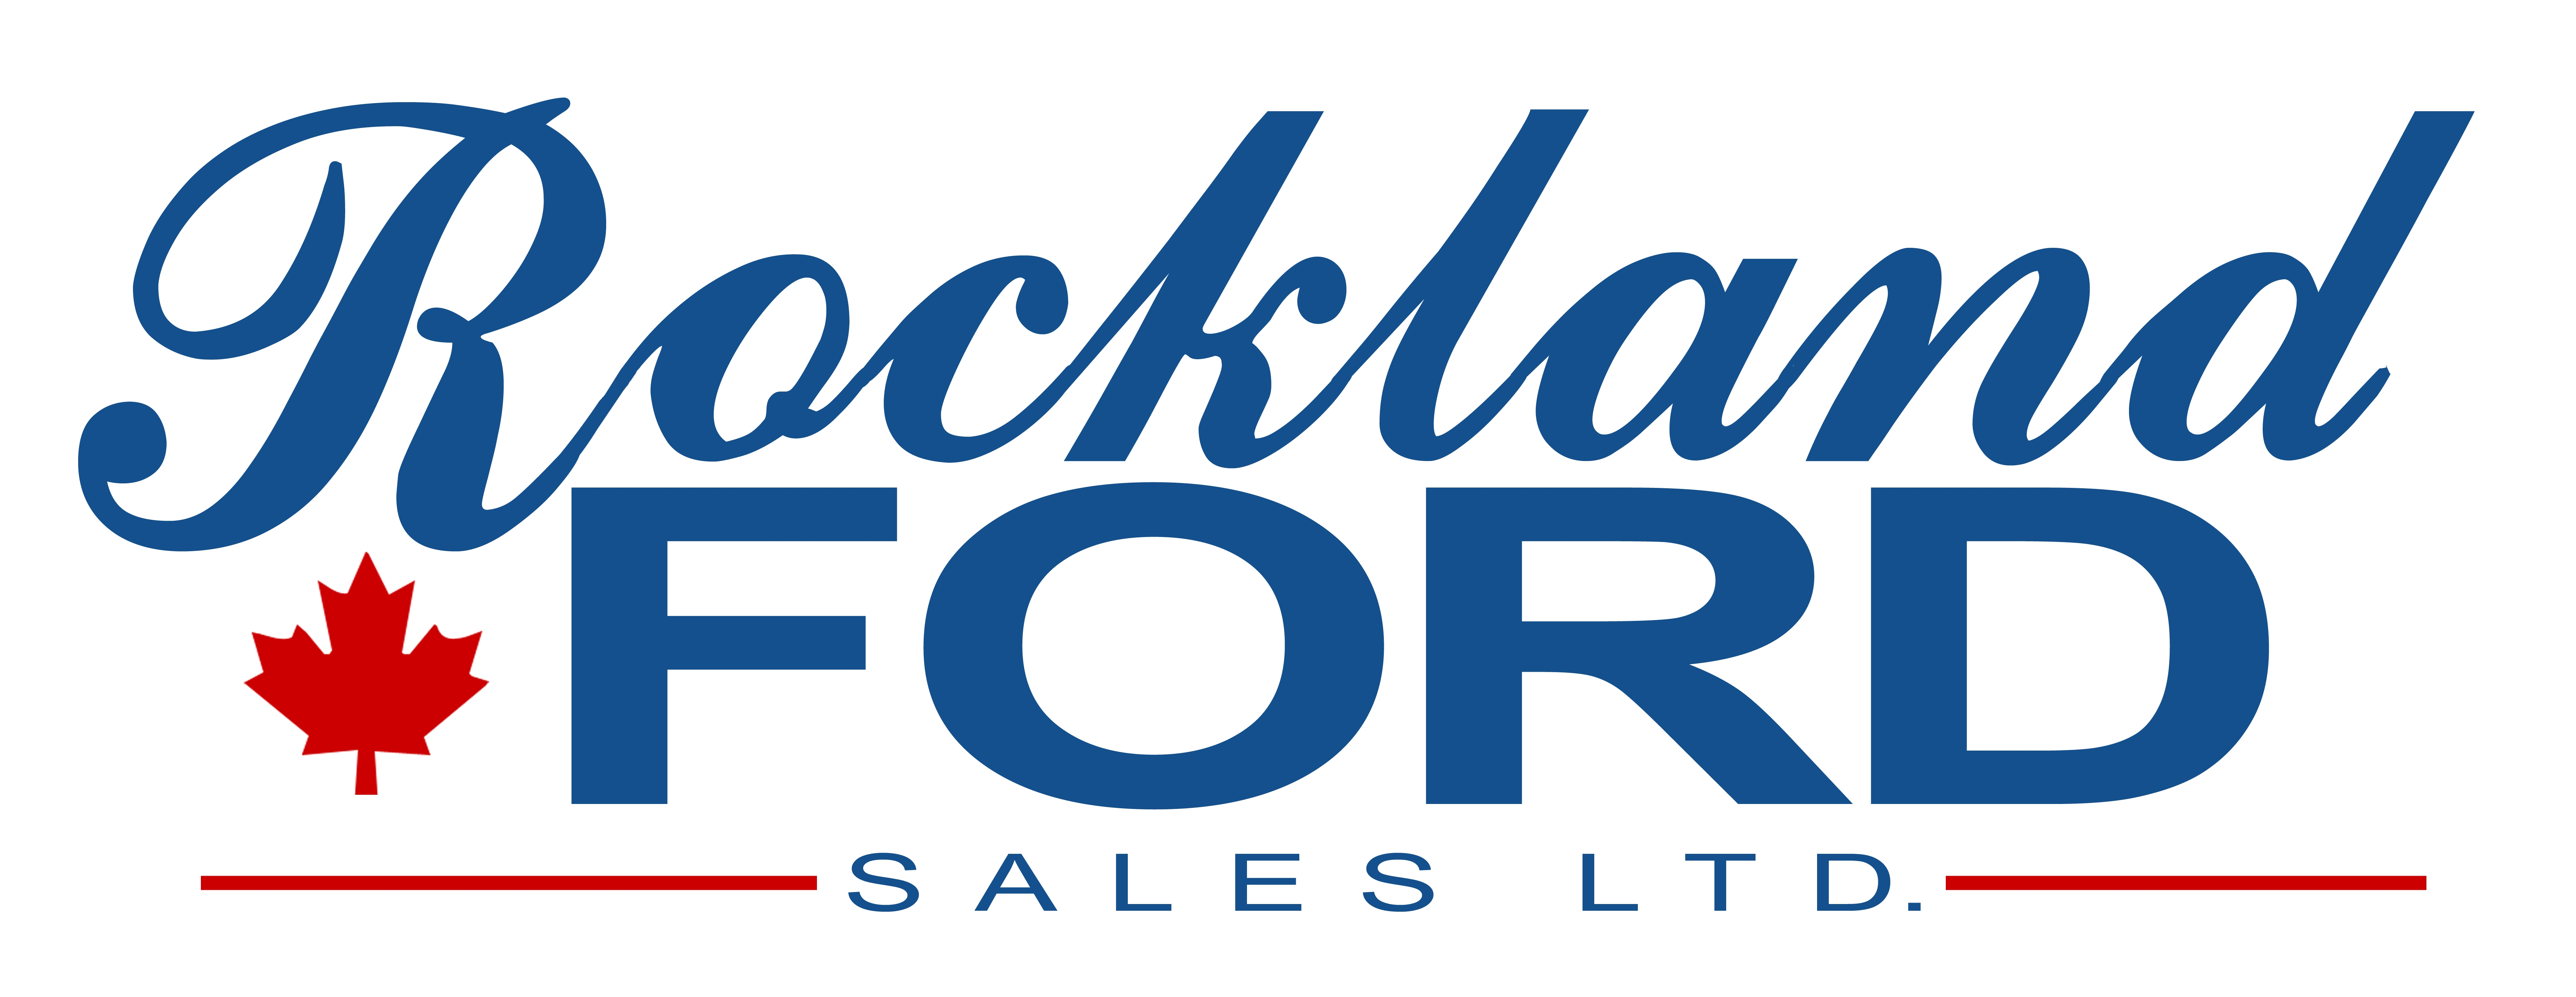 Rockland Ford